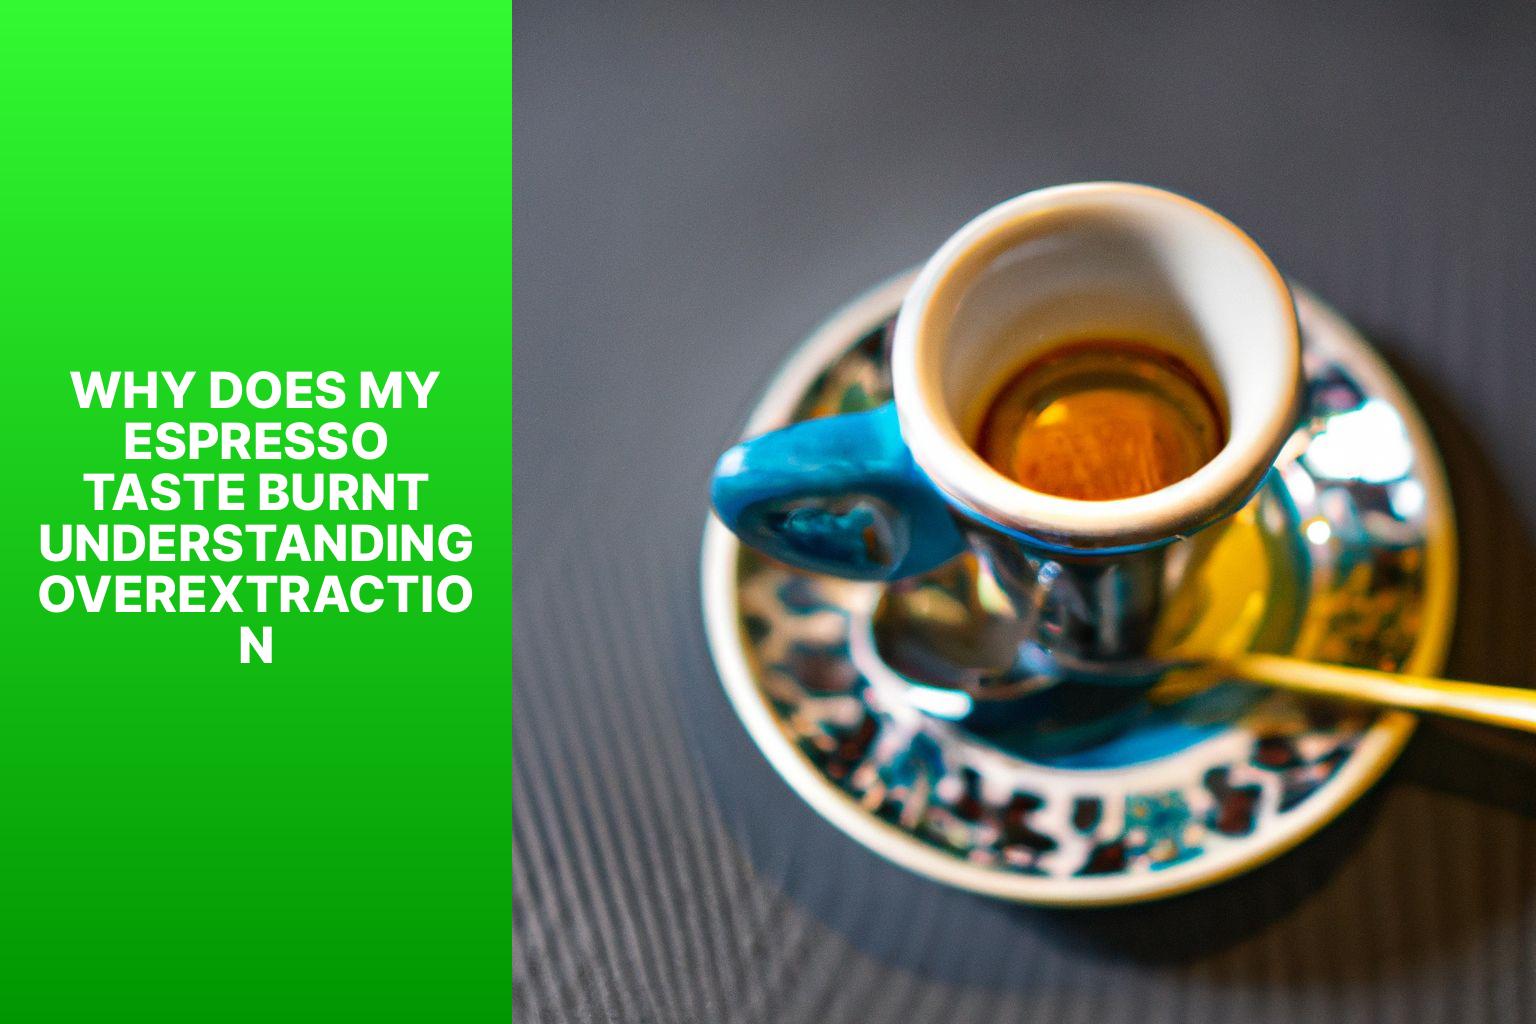 Why Does My Espresso Taste Burnt? Understanding Over-Extraction